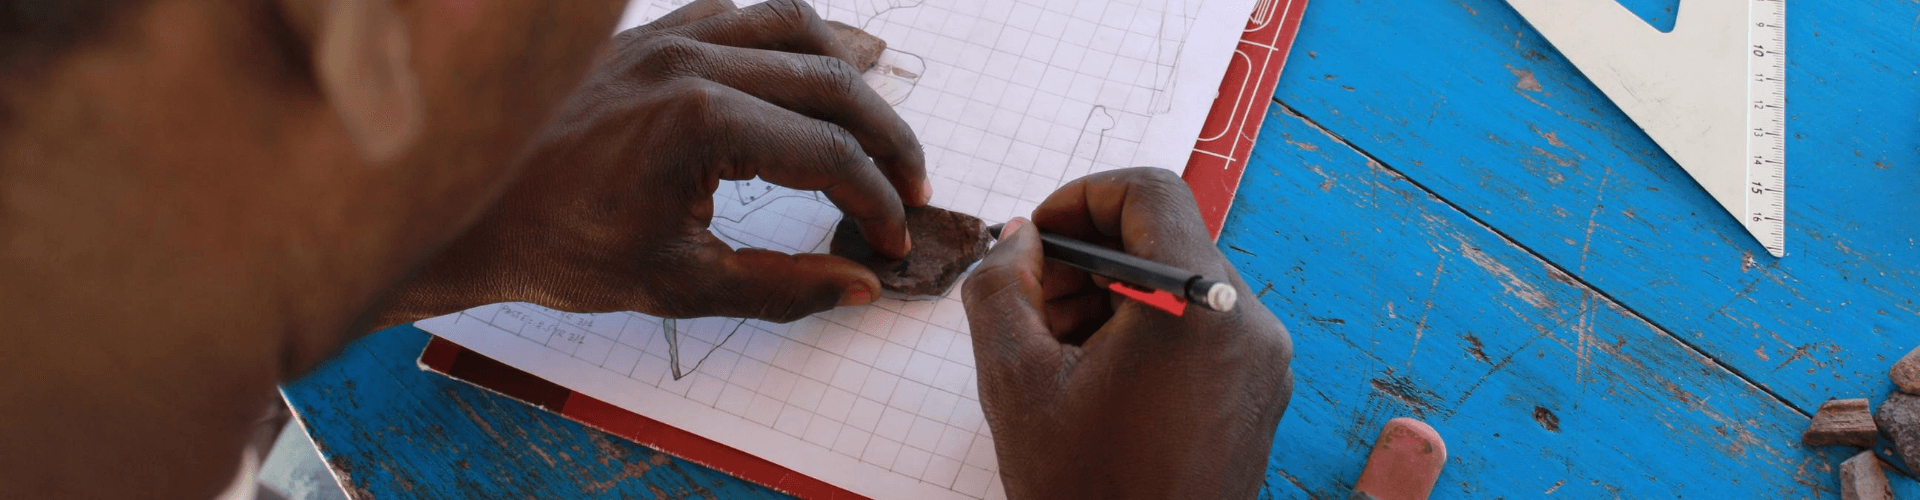 Person tracing a rock on graph paper with drafting tools in the background